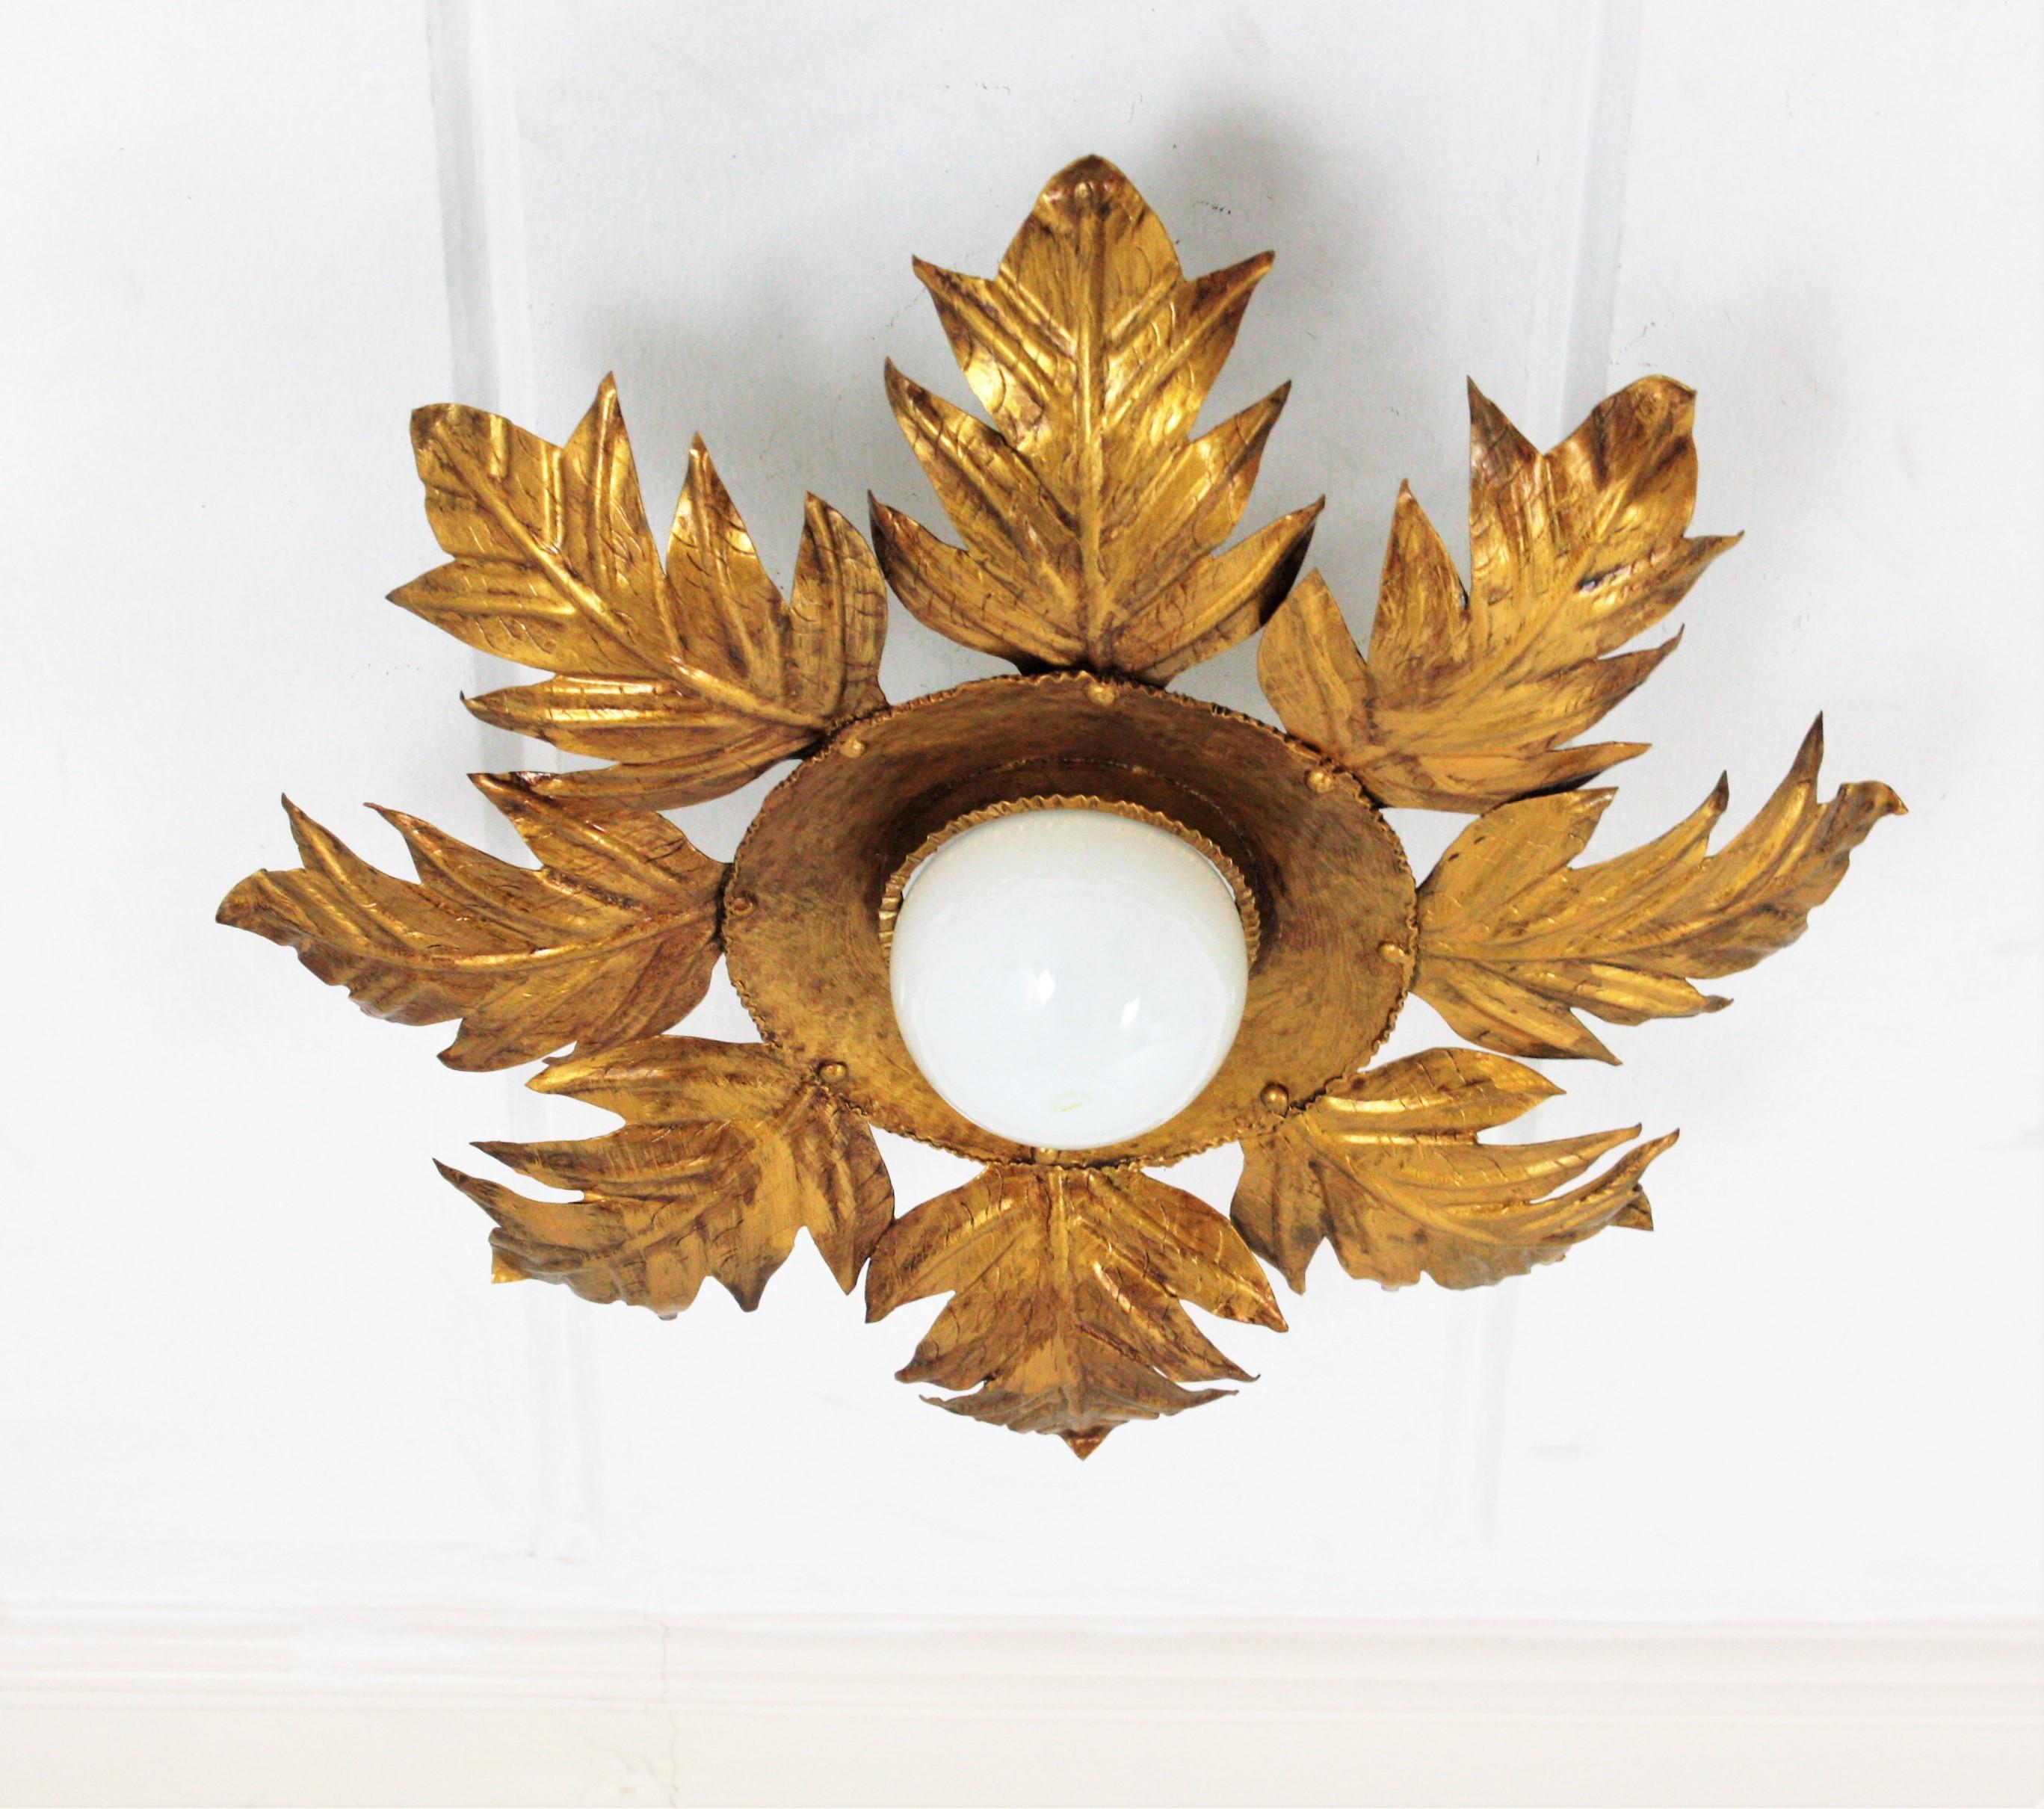 Eye-catching french sunburst leaves flush mount in gilt metal, 1950s.
This leafed sunburst ceiling light fixture has a beautiful construction with large leaves surrounding a central hand-hammered ring. 
It has a central light, newly wired with an